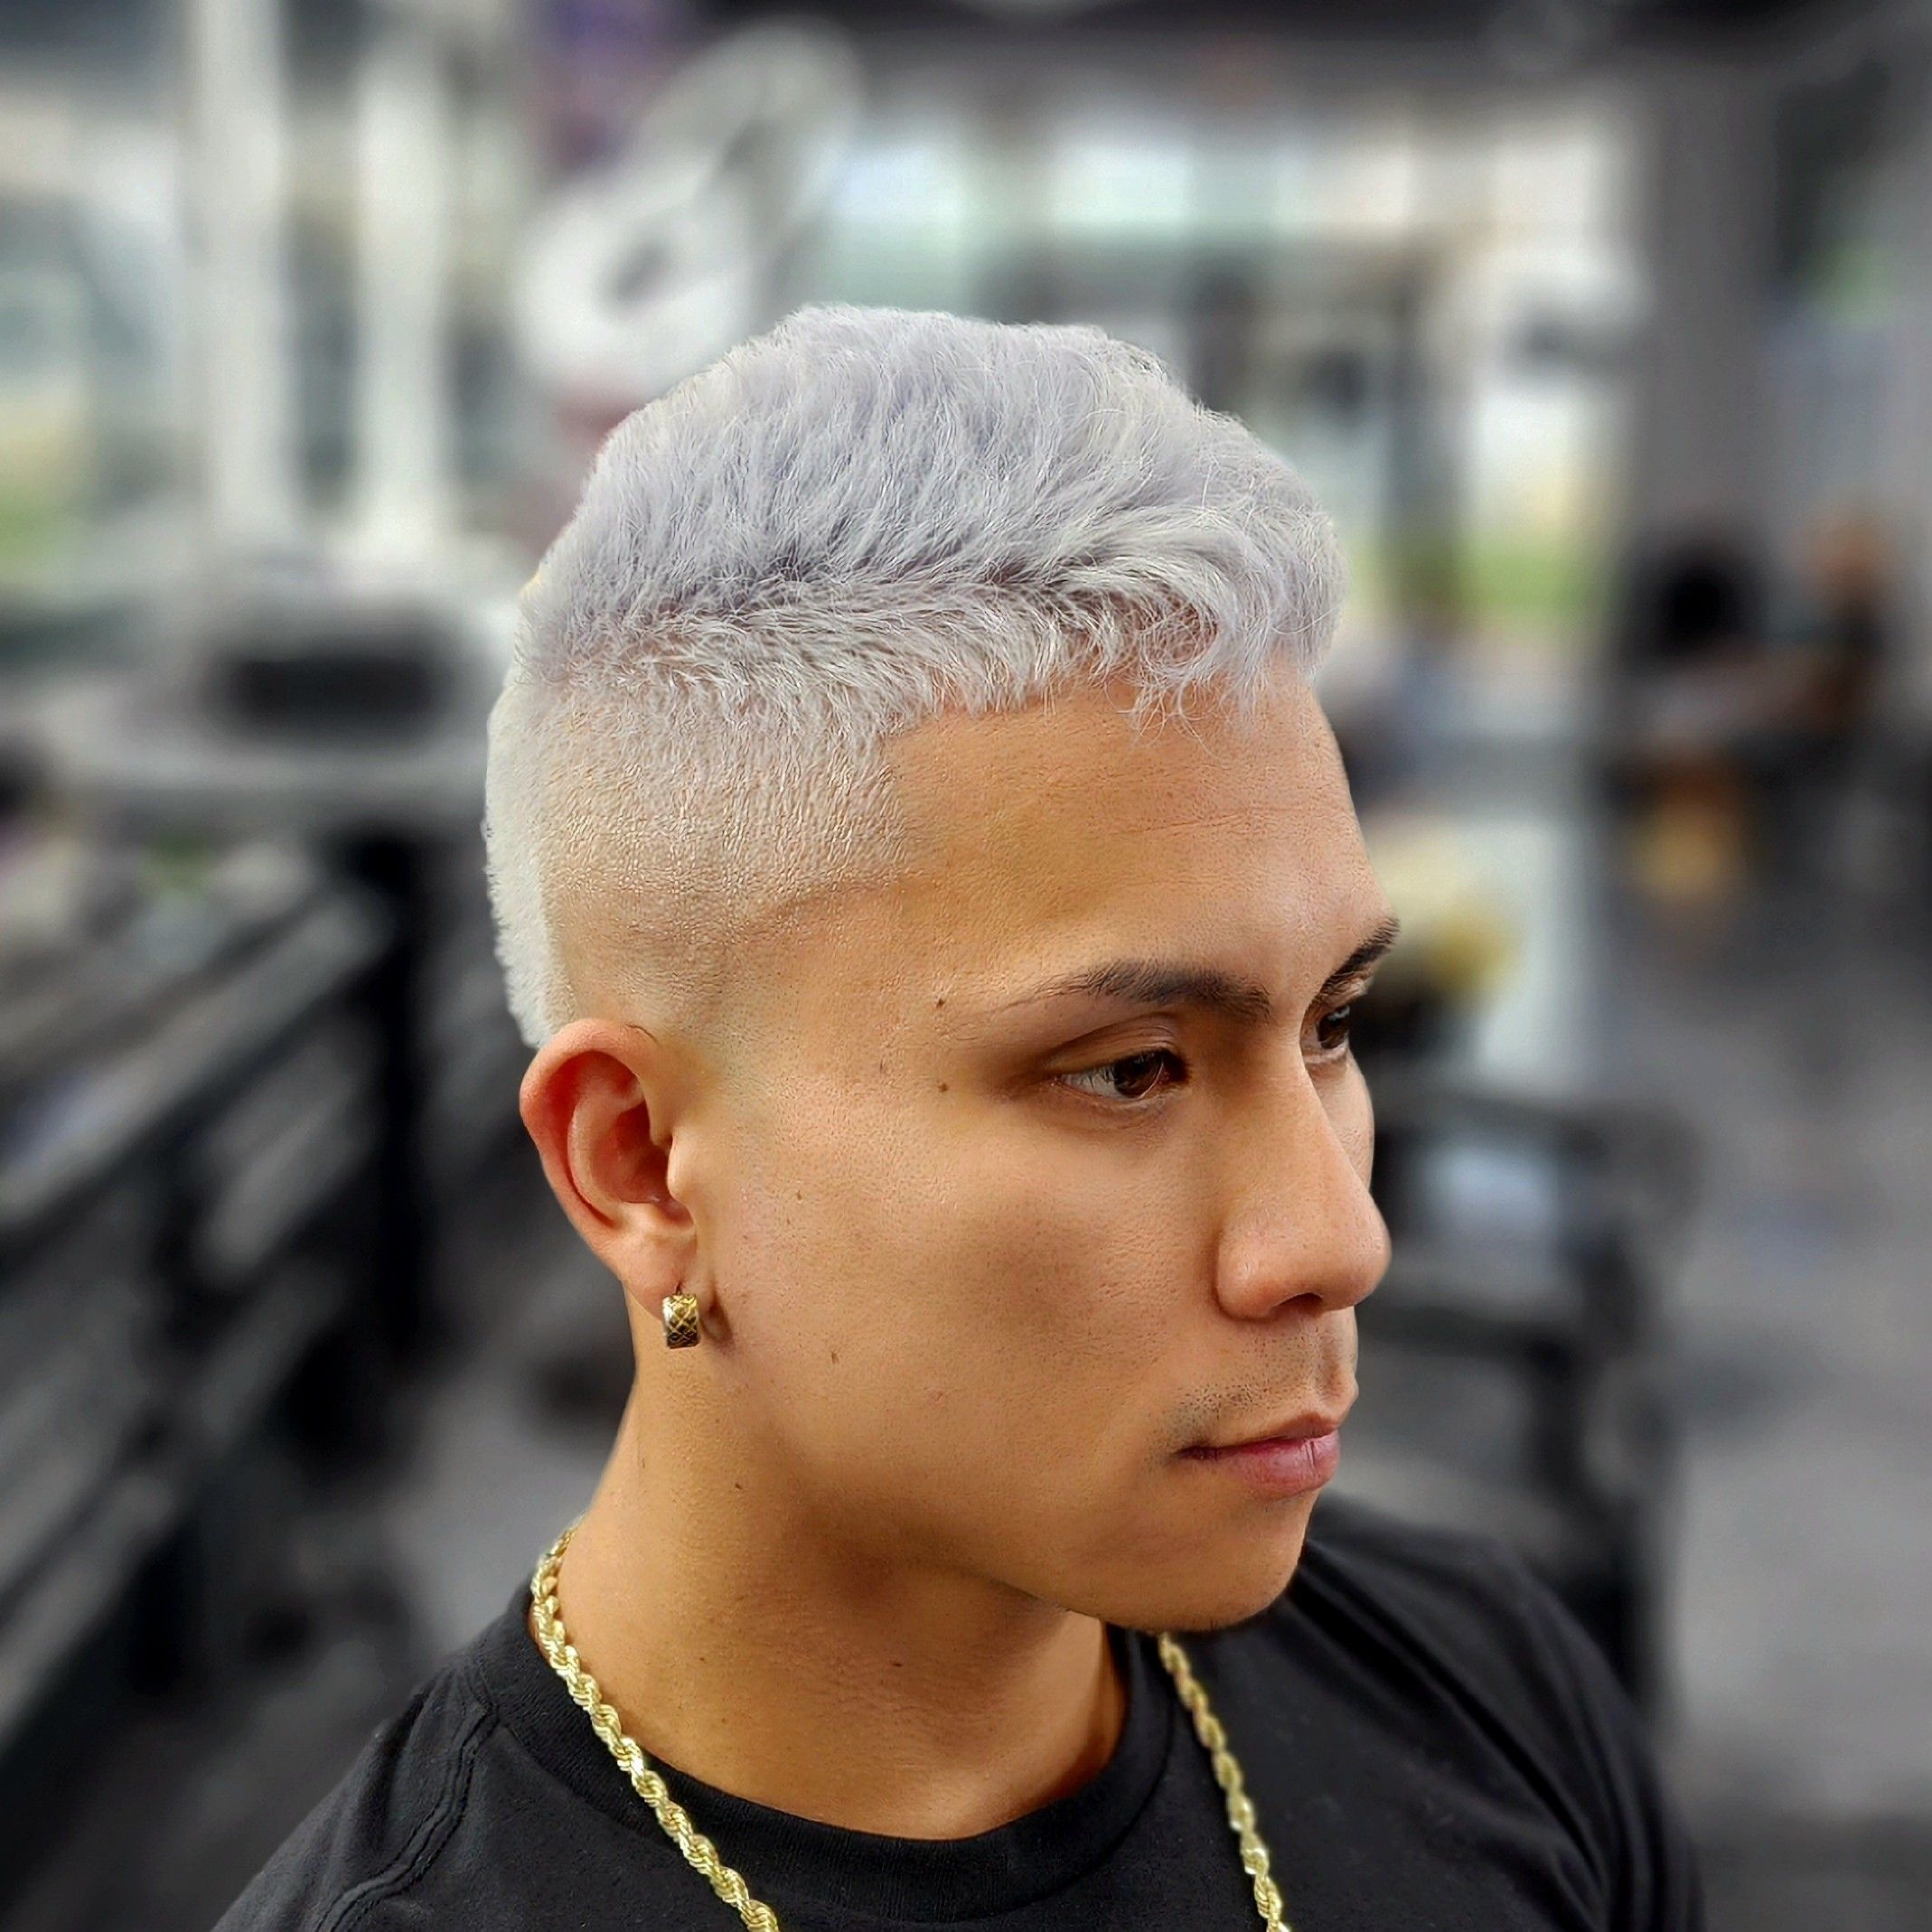 Bleach Hair & Color (Contact Me Before Booking) portfolio